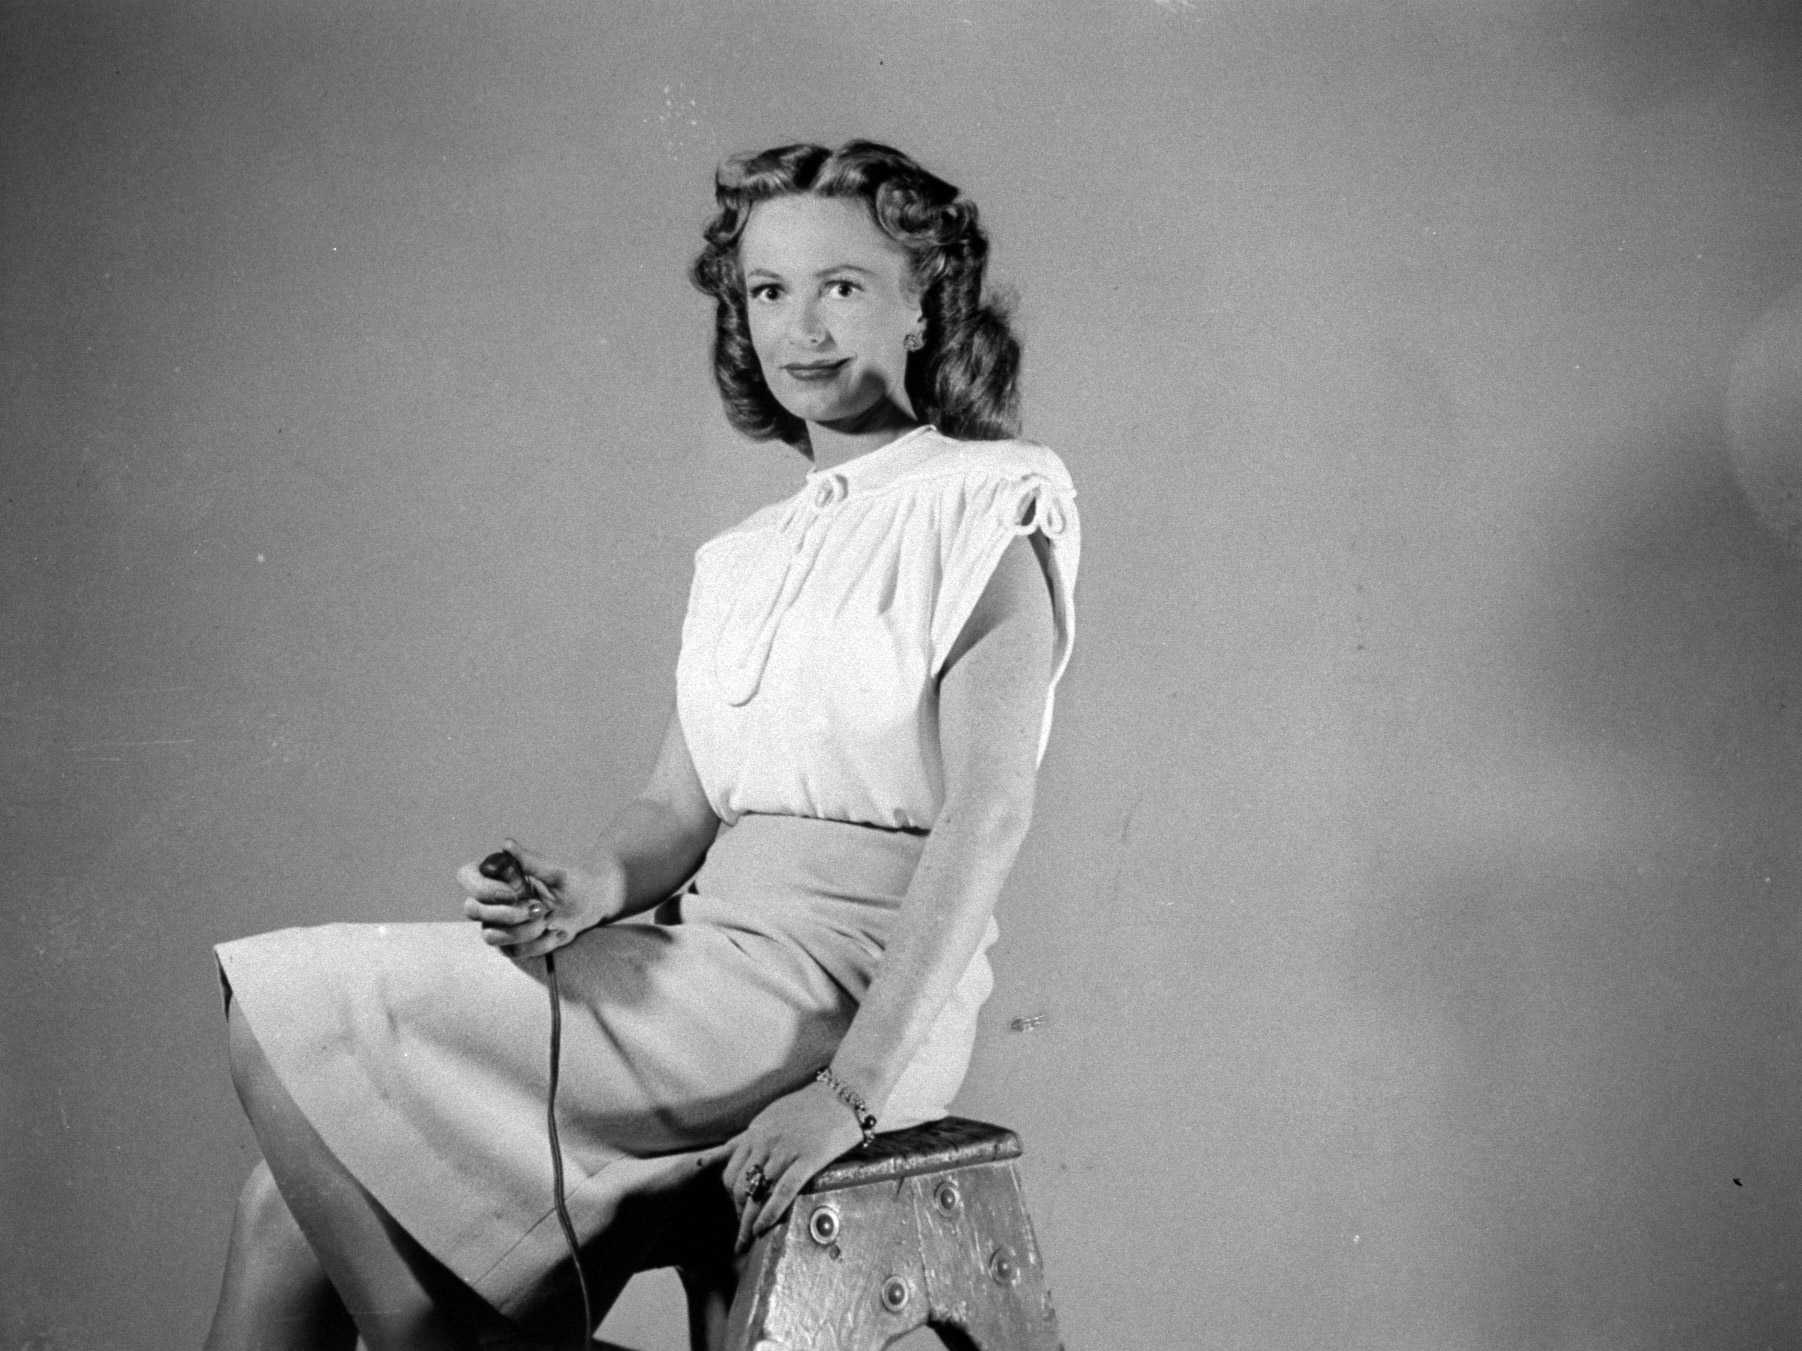 Actress Geraldine Fitzgerald holding shutter release as she takes her own photograph.